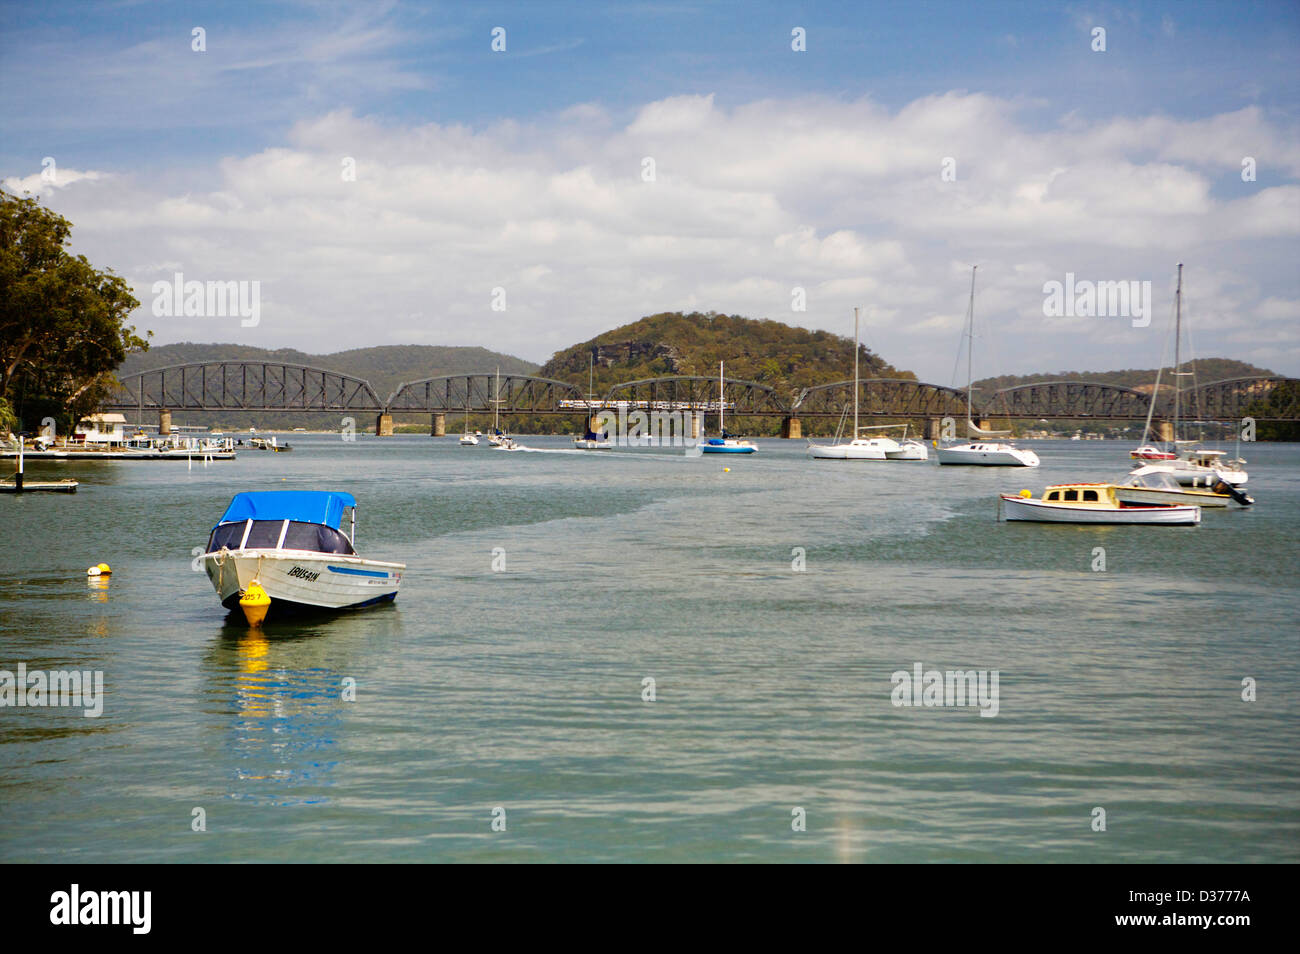 Boats on the water at Dangar Island in Hawkesbury, New South Wales, Australia Stock Photo